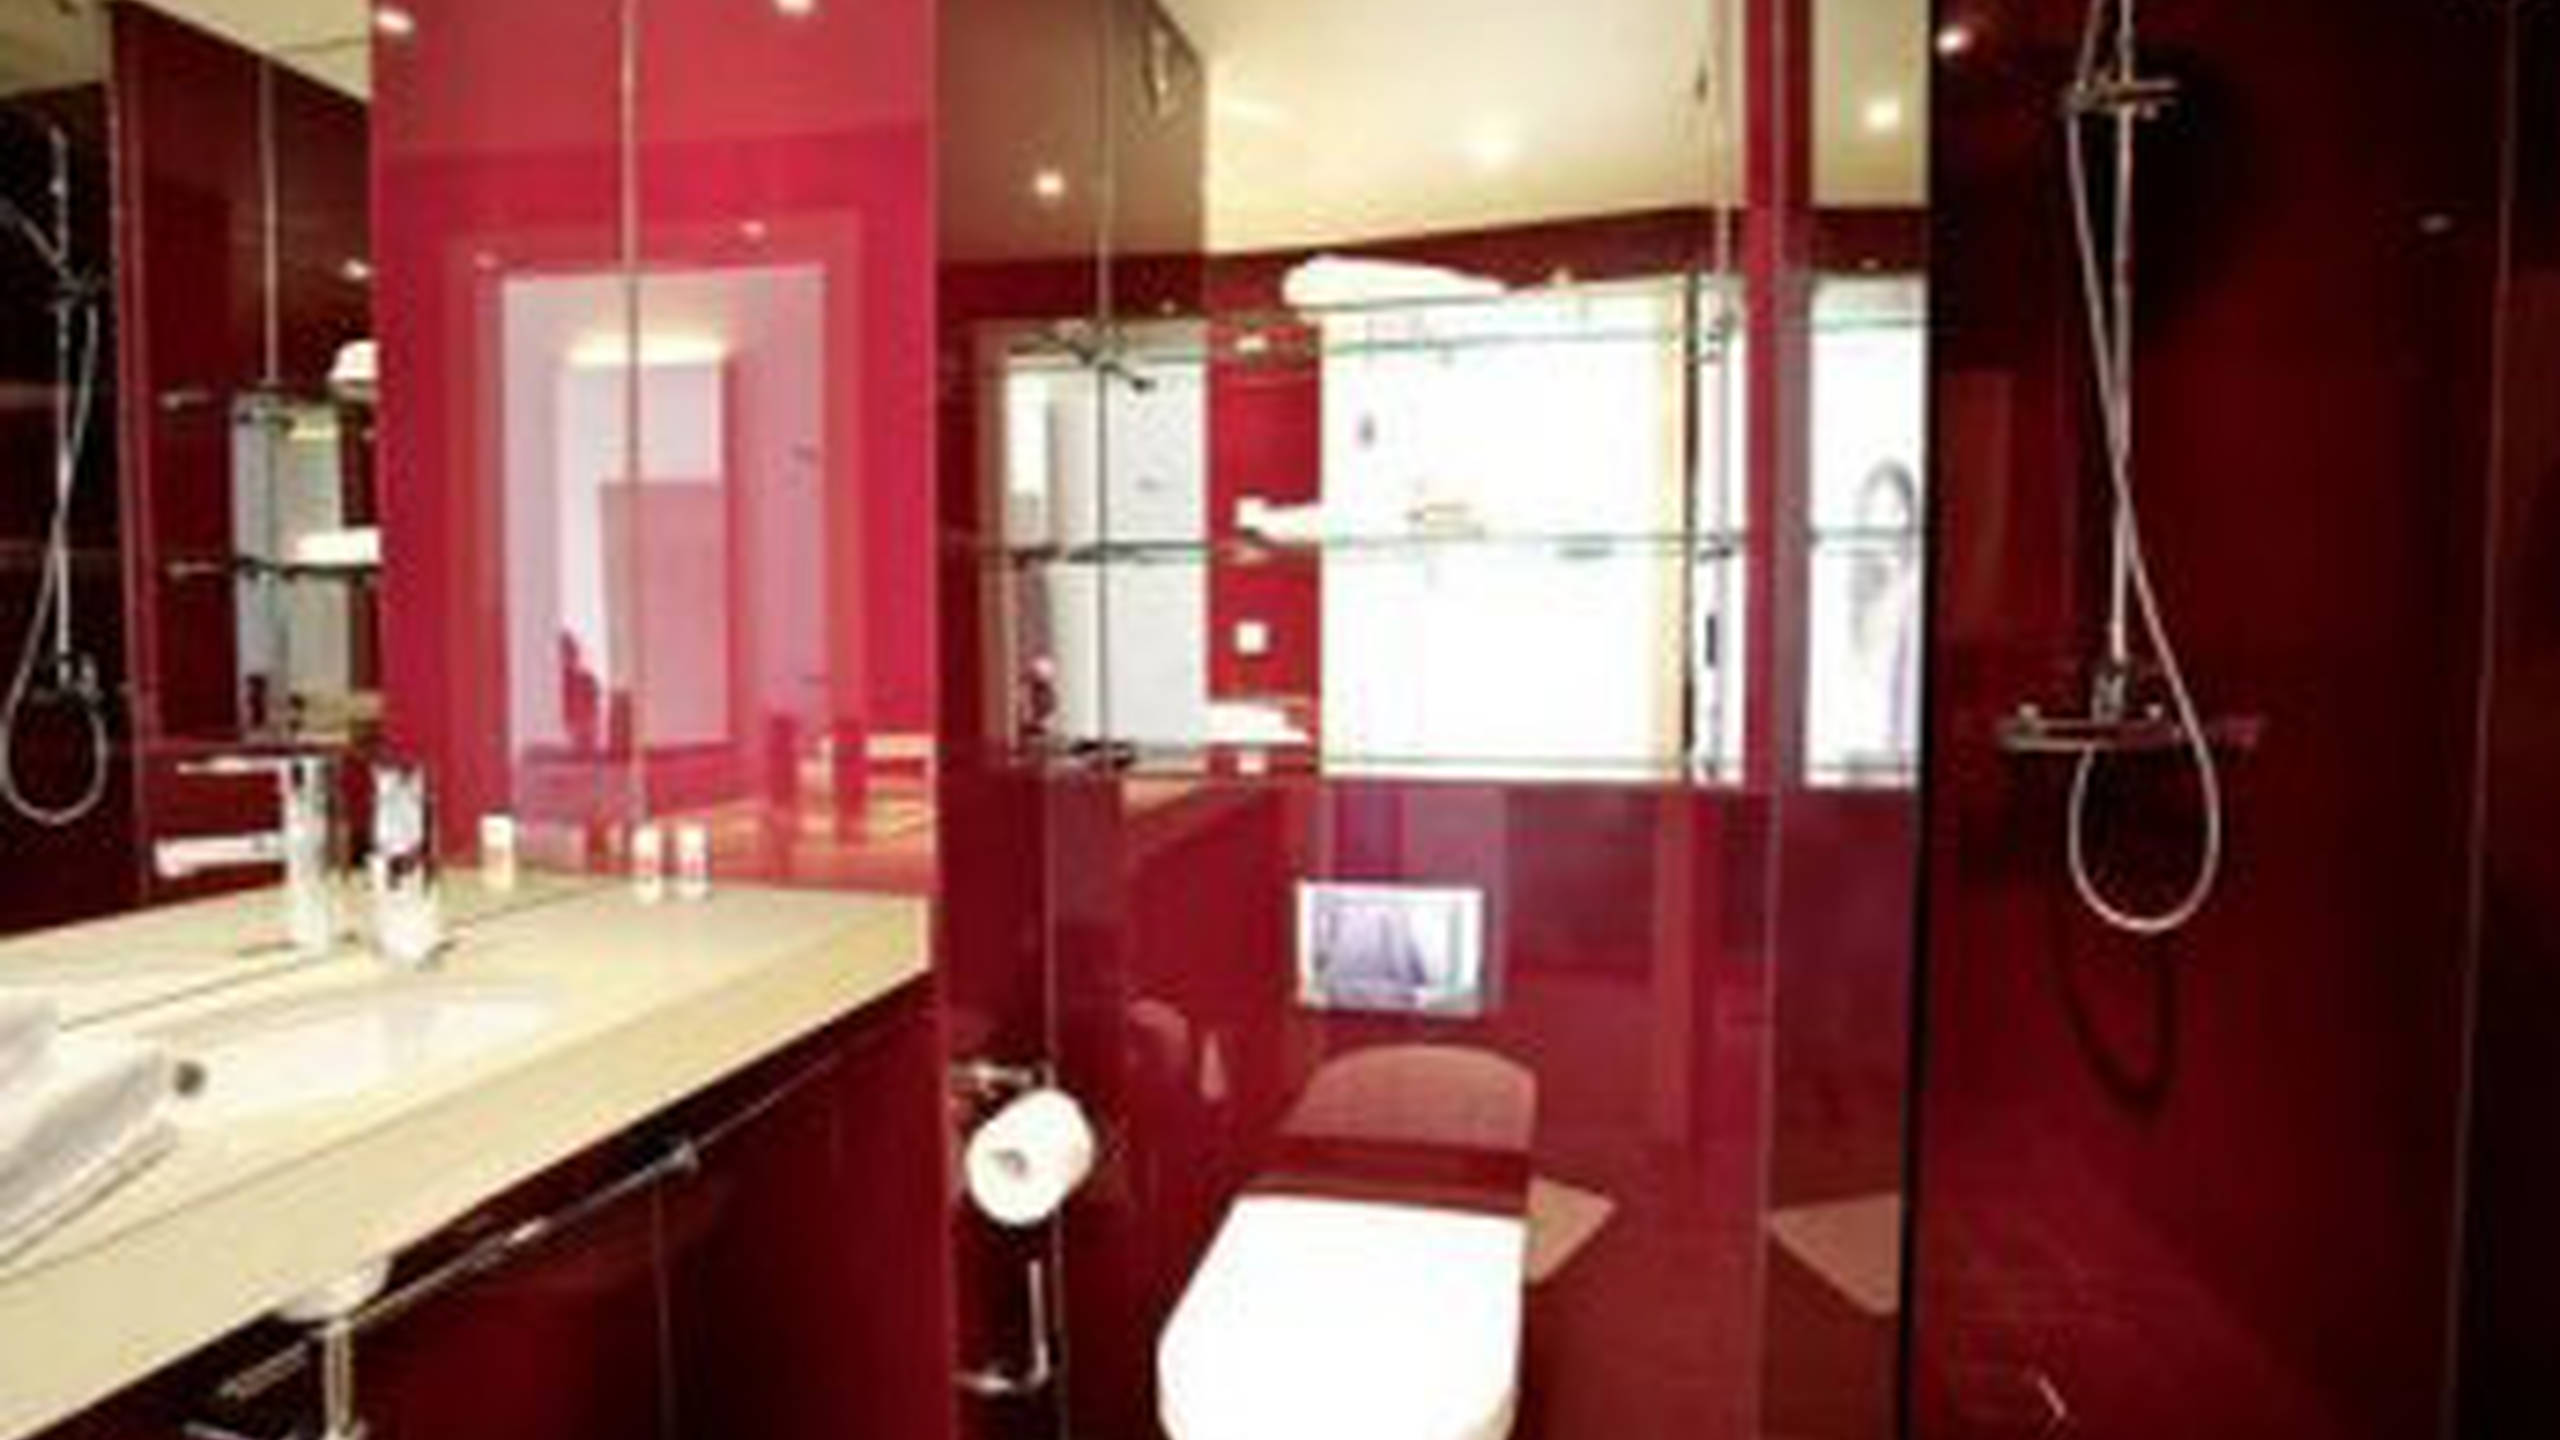 ADMARES delivers modular bathrooms for the hotel Smartino in Schwaebisch Hall, Germany